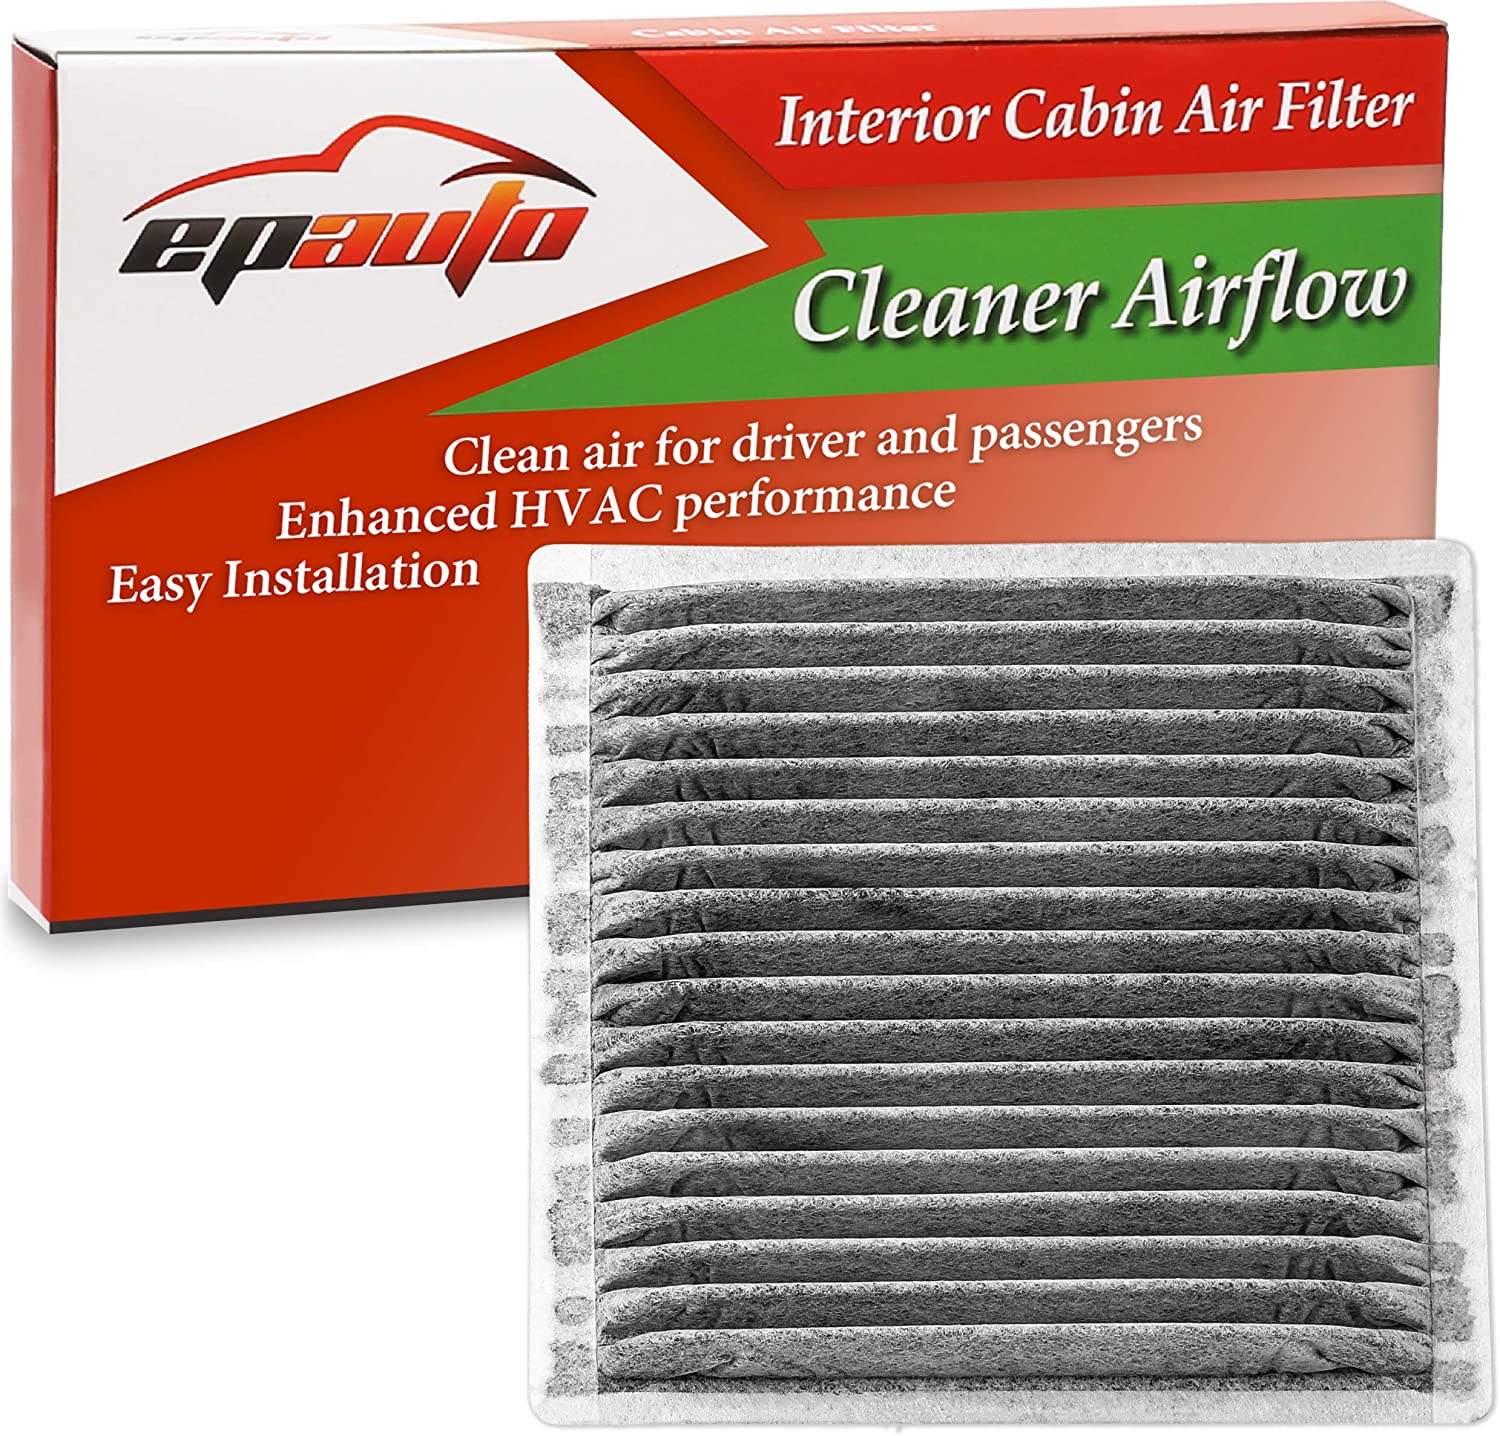 EPAuto CP547 (CF10547) Cabin Air Filter includes Activated Carbon Replacement for Ford Edge, Lincoln MKX(2008-2015) / MKZ(2008-2009) / MKS(2009), Mazda CX-9 (2007-2015)